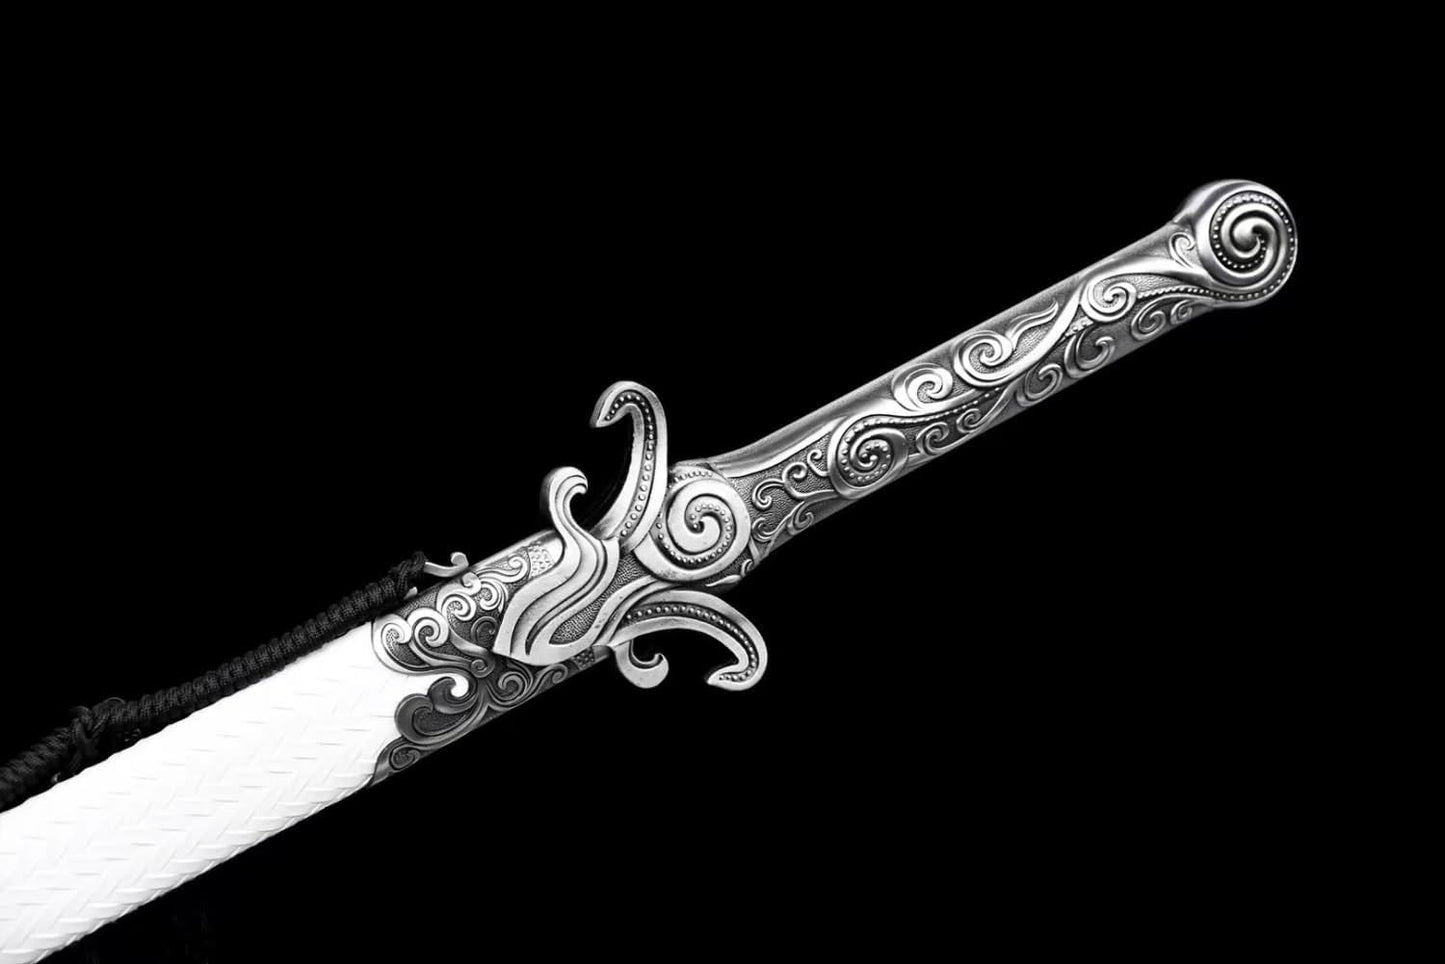 Ancient Chinese Sword han jian-Forged High Carbon Steel Blade,Alloy Handle